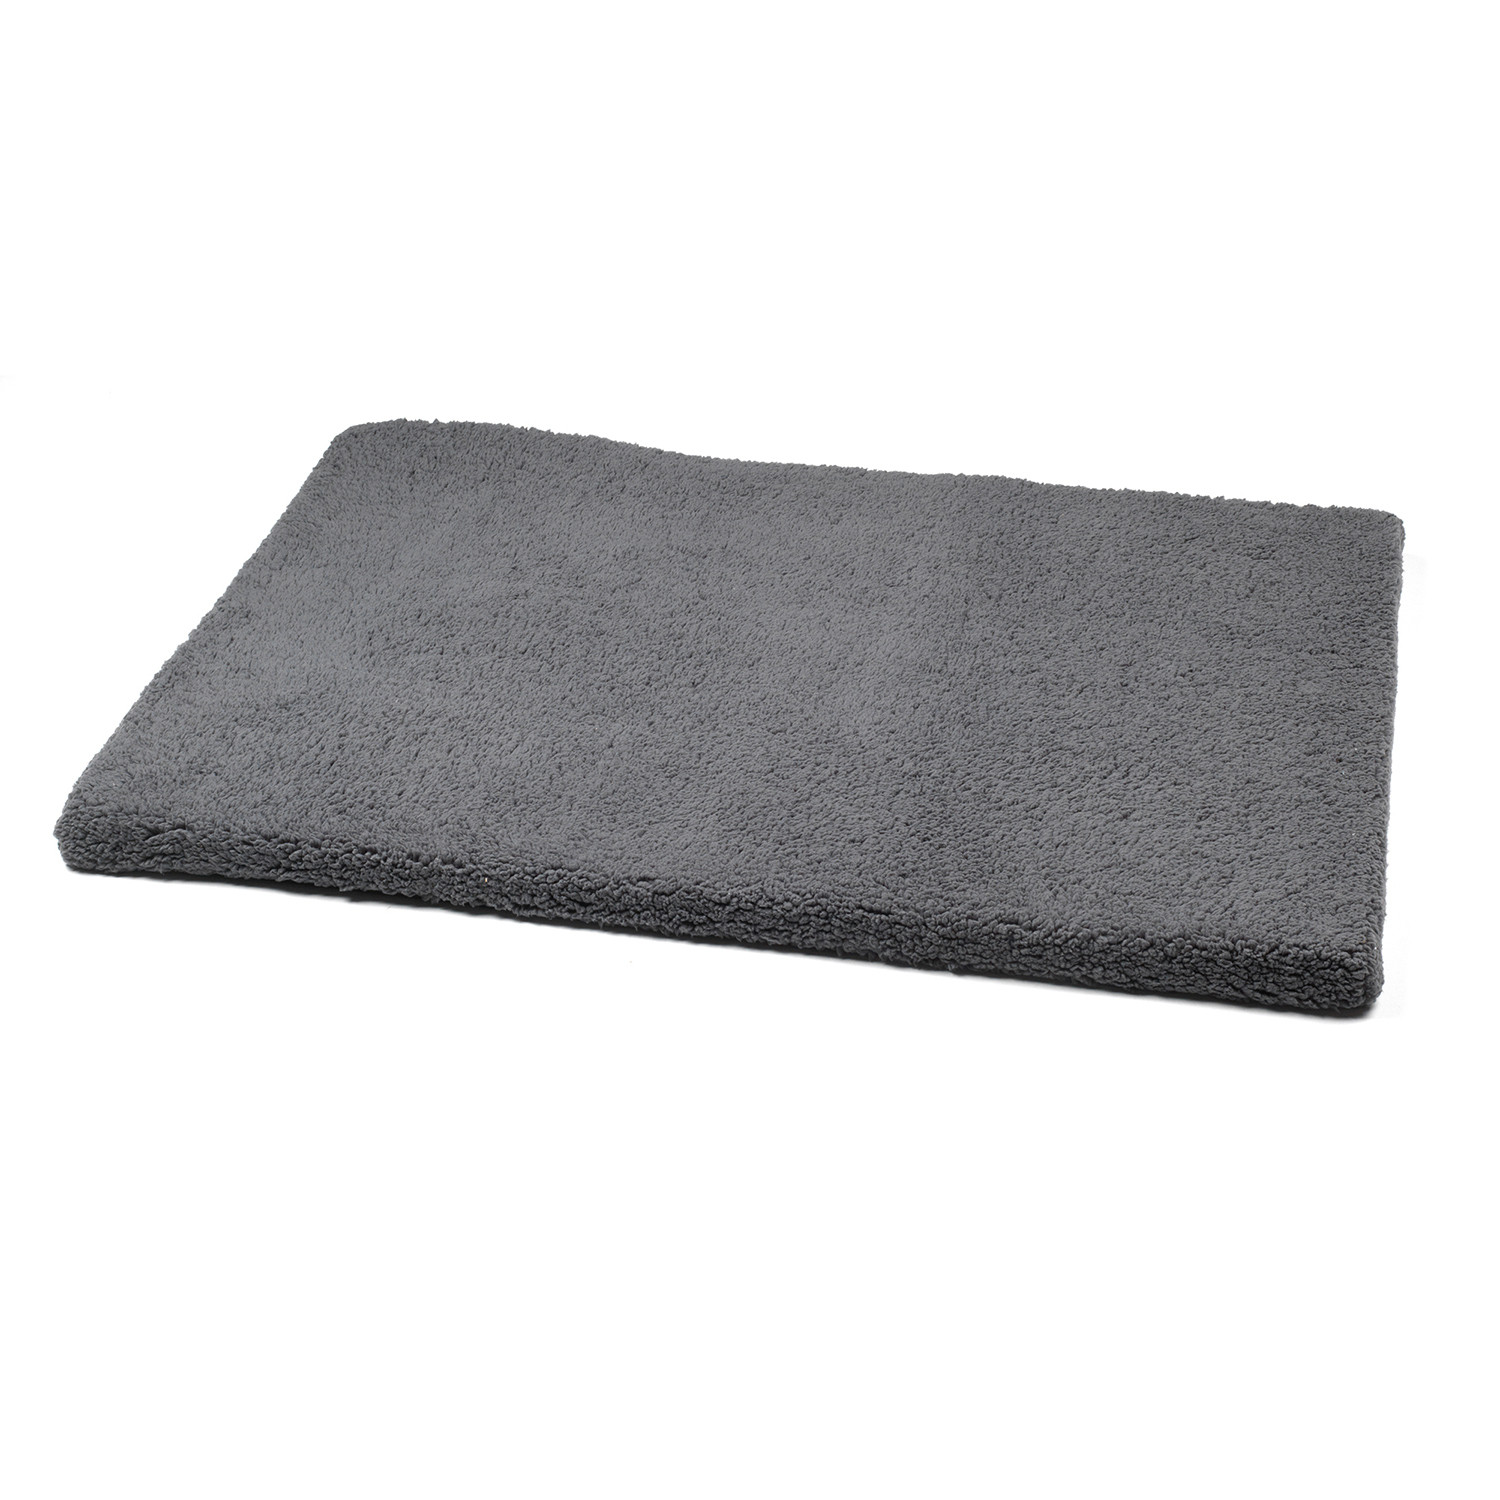 Single Clever Paws Fleece Memory Foam Soft Dog Bed in Assorted styles Image 2